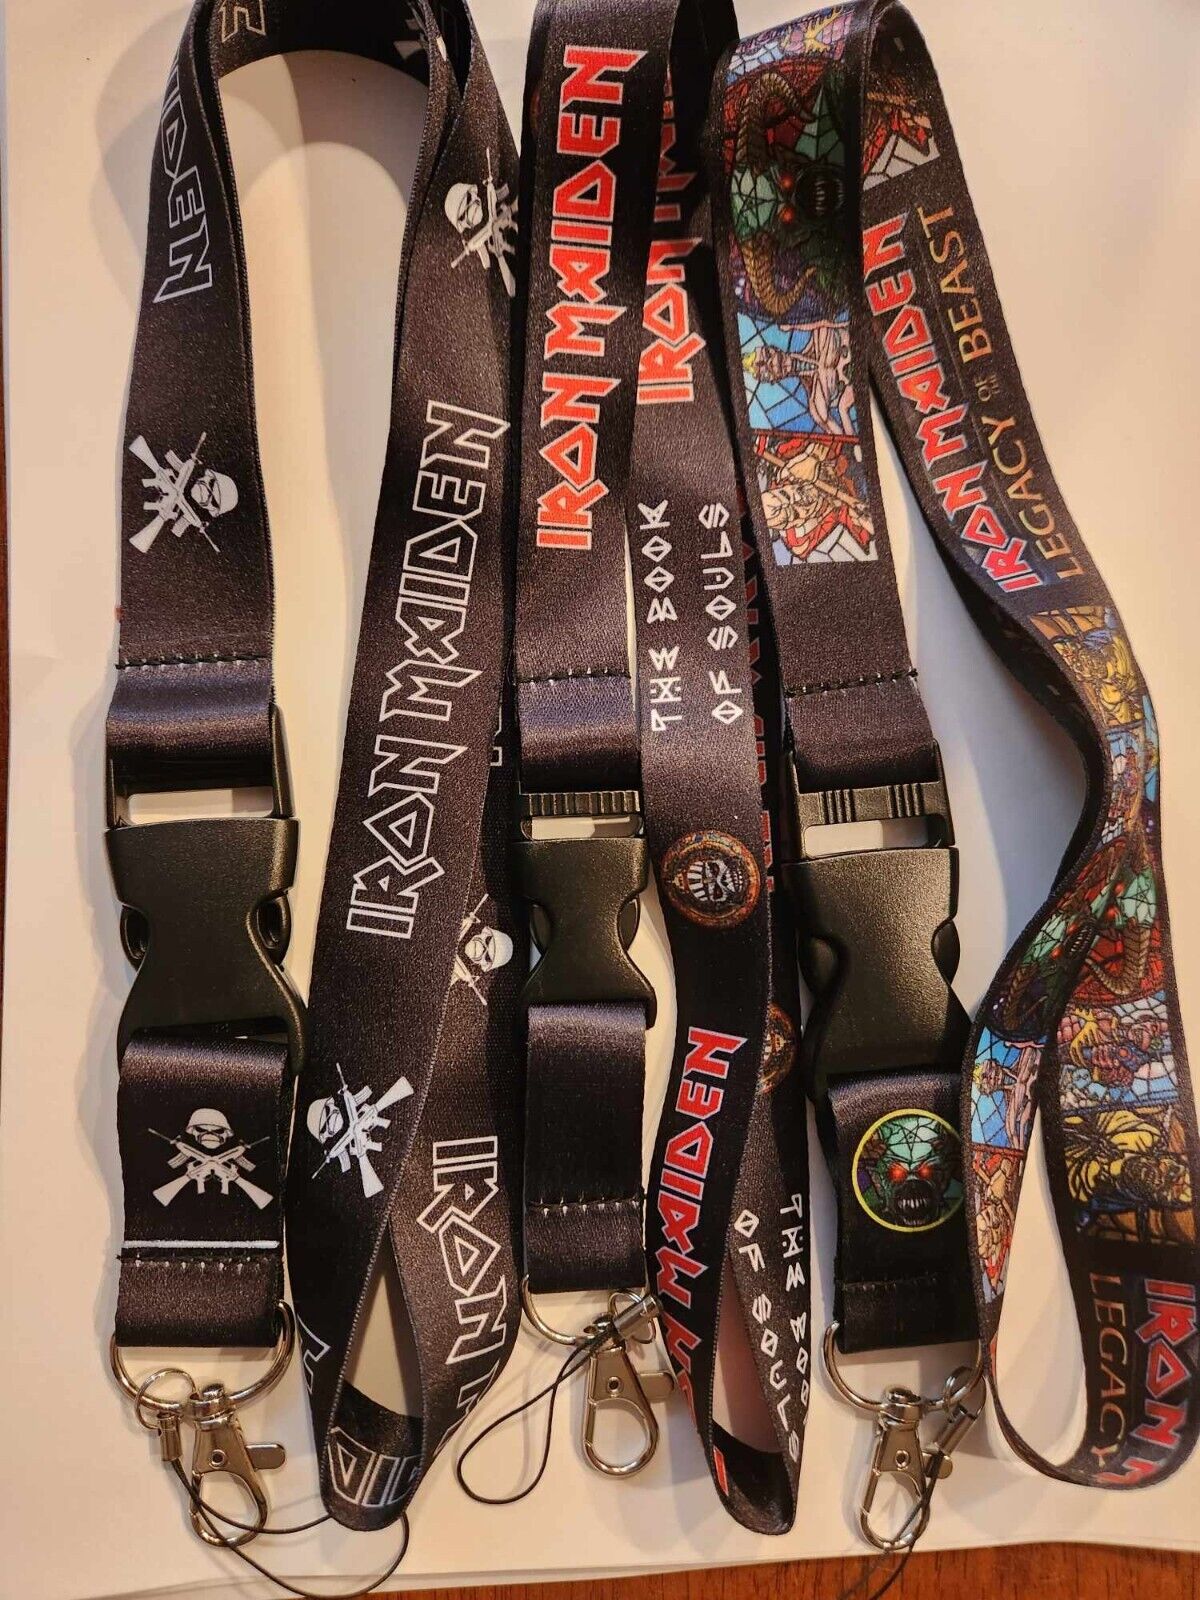 3 Pcs Iron Rock Collection Themed Lanyards Heavy Metal Music Concert